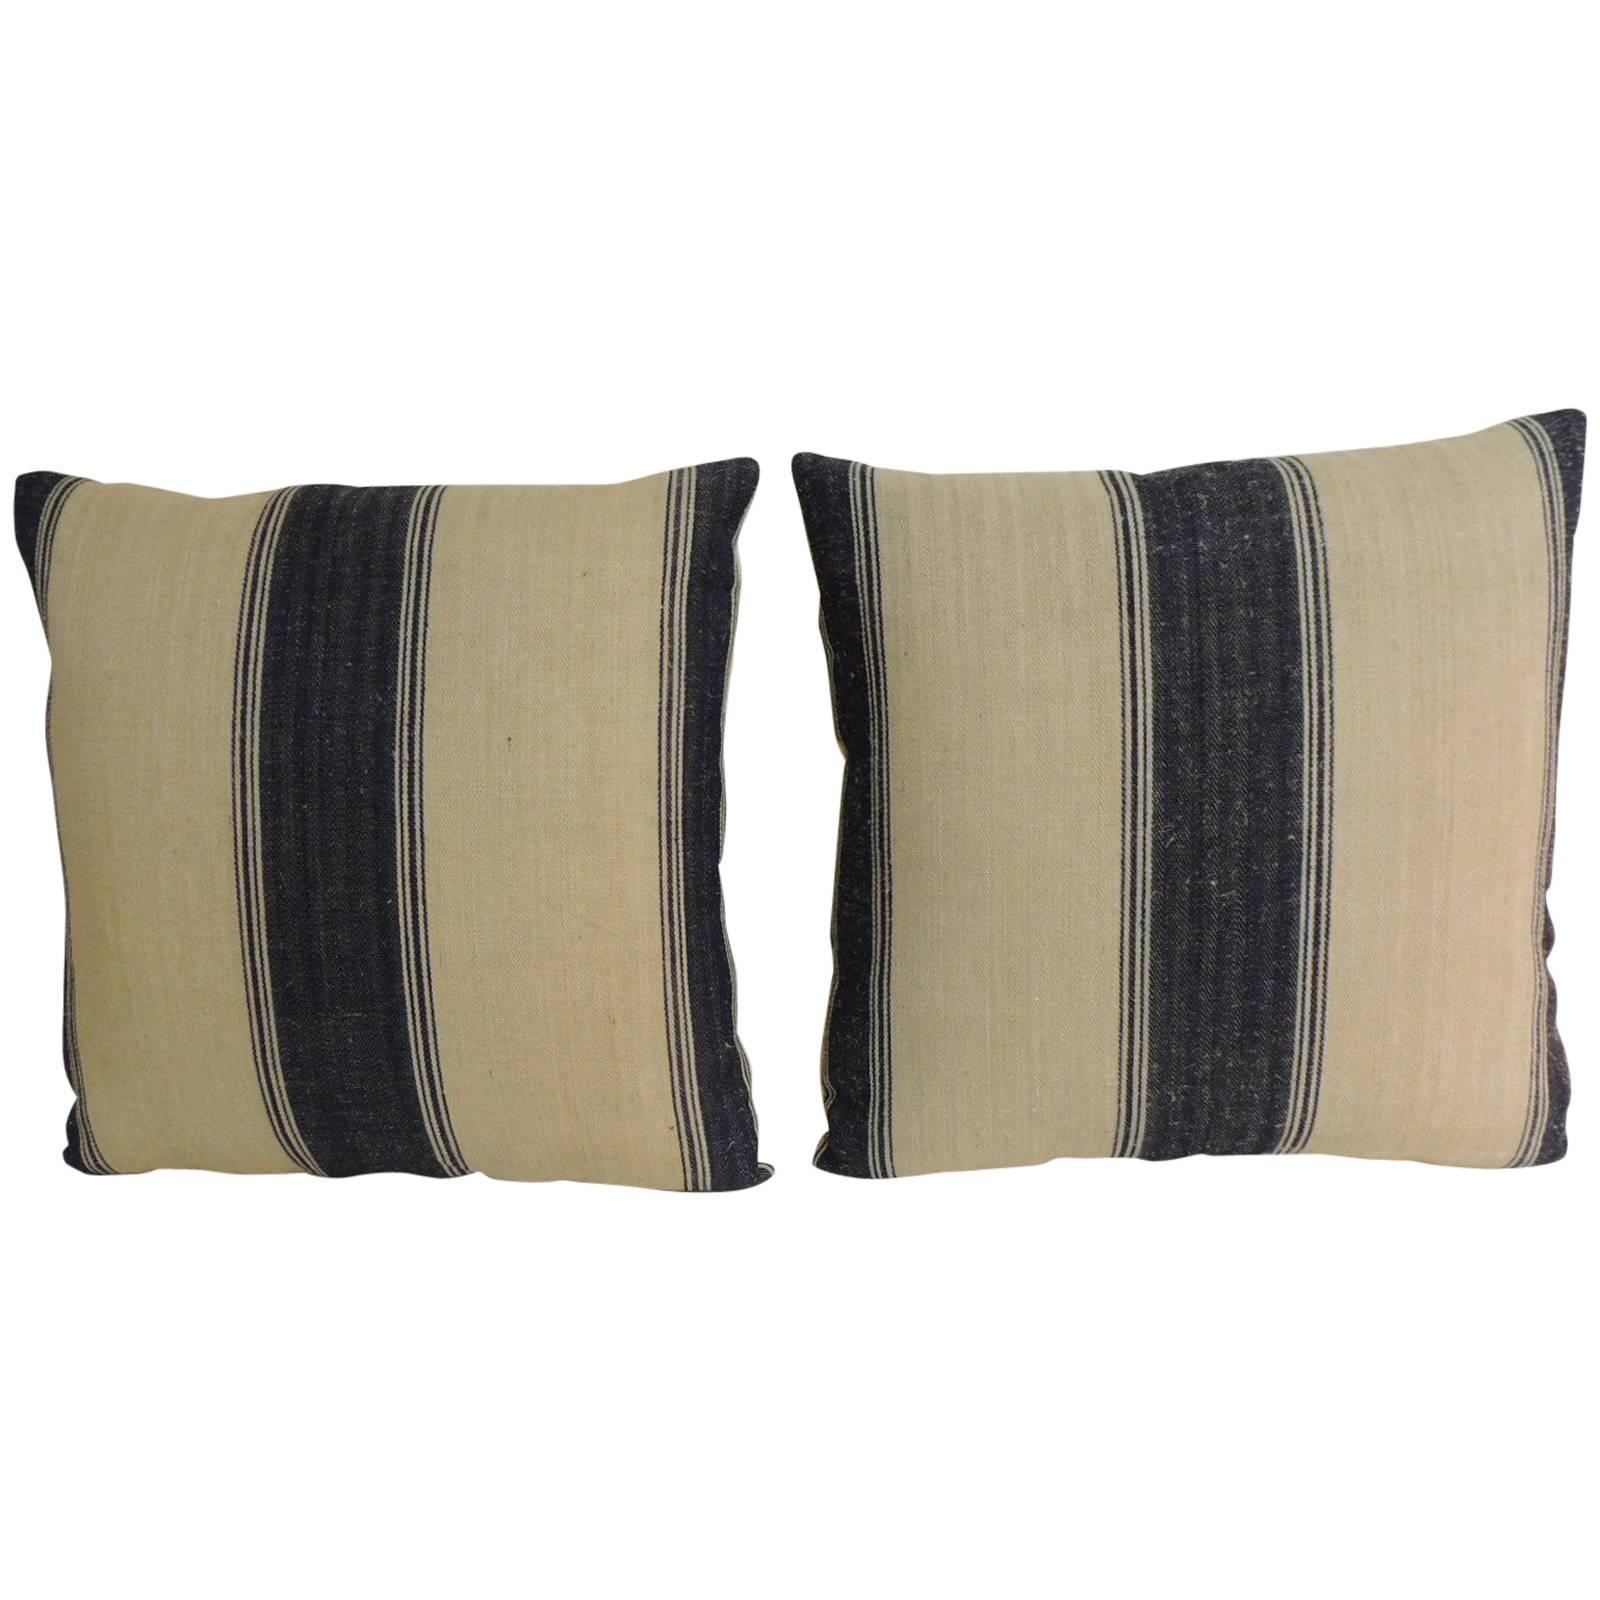 Pair of 19th Century French Dark Blue Stripes Decorative Pillows